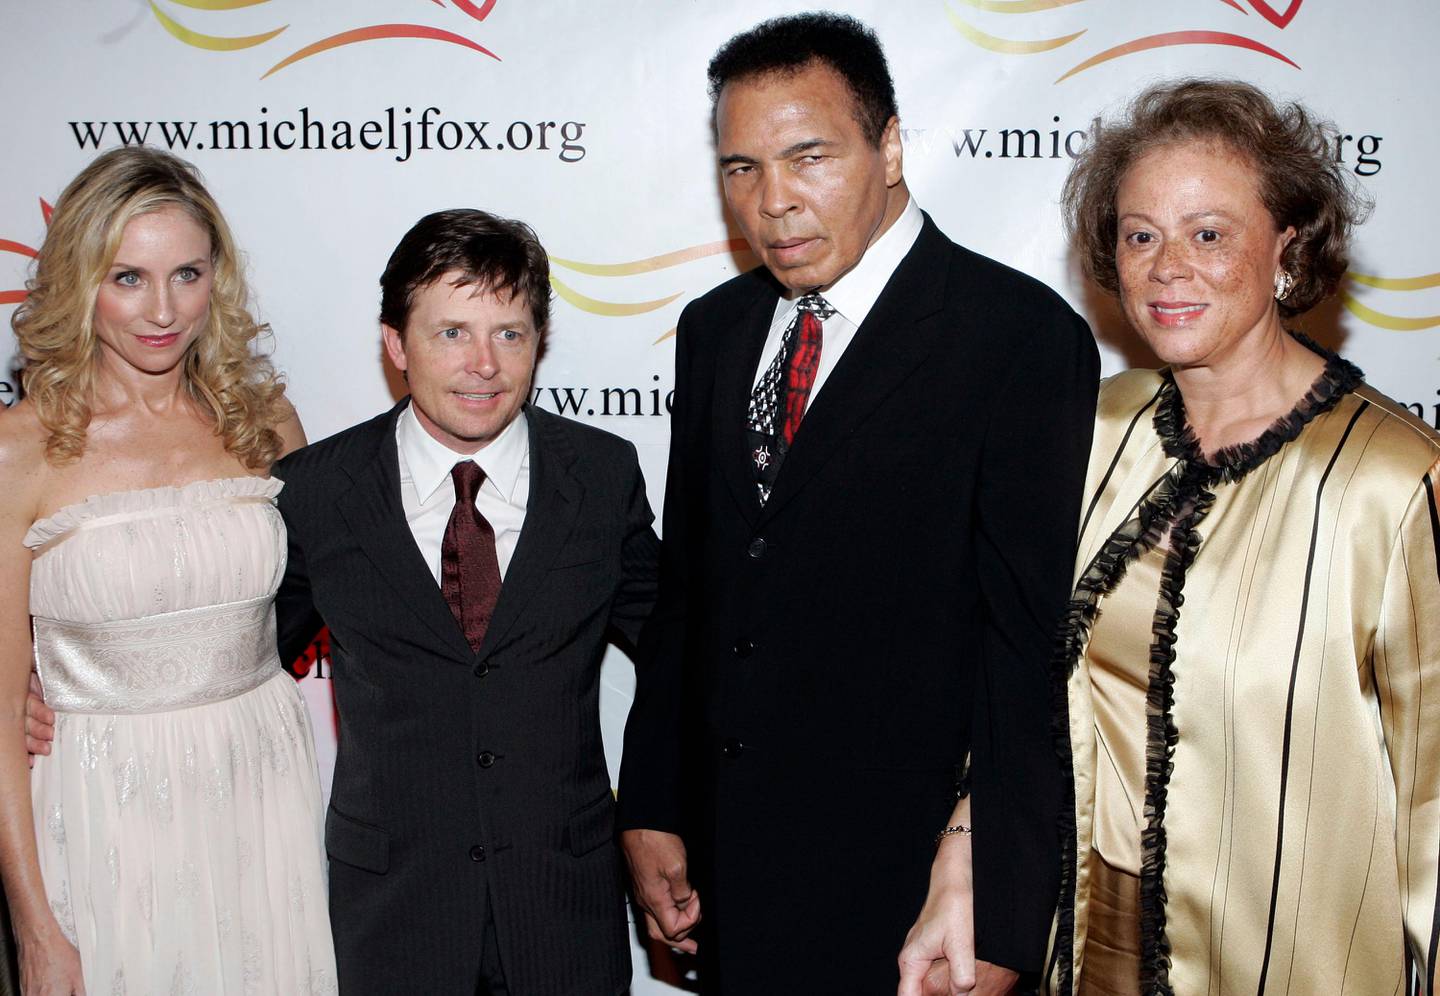 Actress Tracy Pollan, left, her husband Michael J. Fox, second left, boxing legend Muhammad Ali and his wife Lonnie Ali, right, attend the Michael J. Fox Foundation's "A Funny Thing Happened On The Way To Cure Parkinson's..." benefit gala, Saturday, Nov. 11, 2006, in New York. (AP Photo/Stephen Chernin)